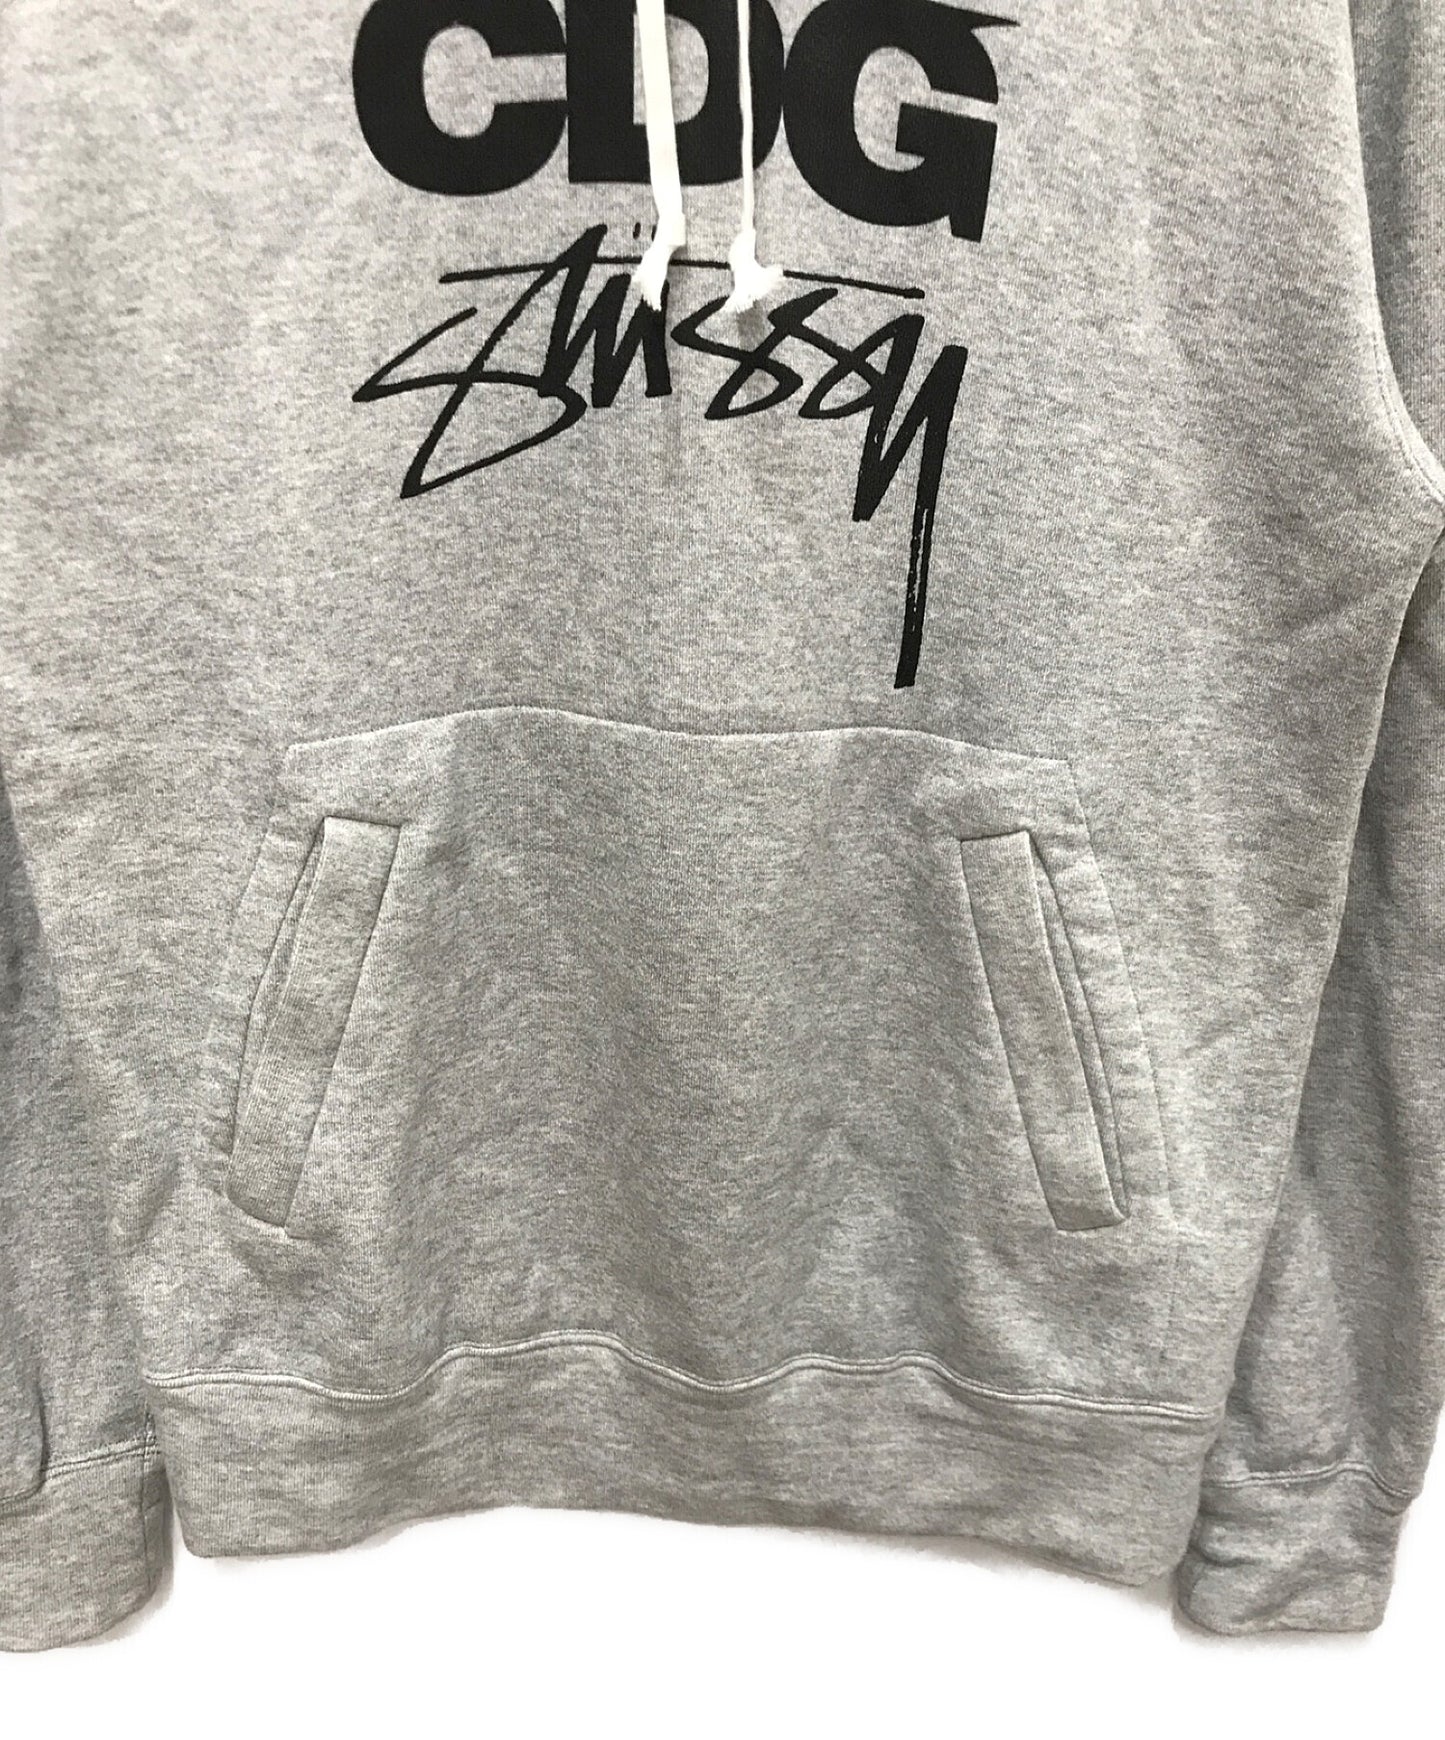 [Pre-owned] COMME des GARCONS × STUSSY 21AW HOODED SWEATSHIRT SH-T001